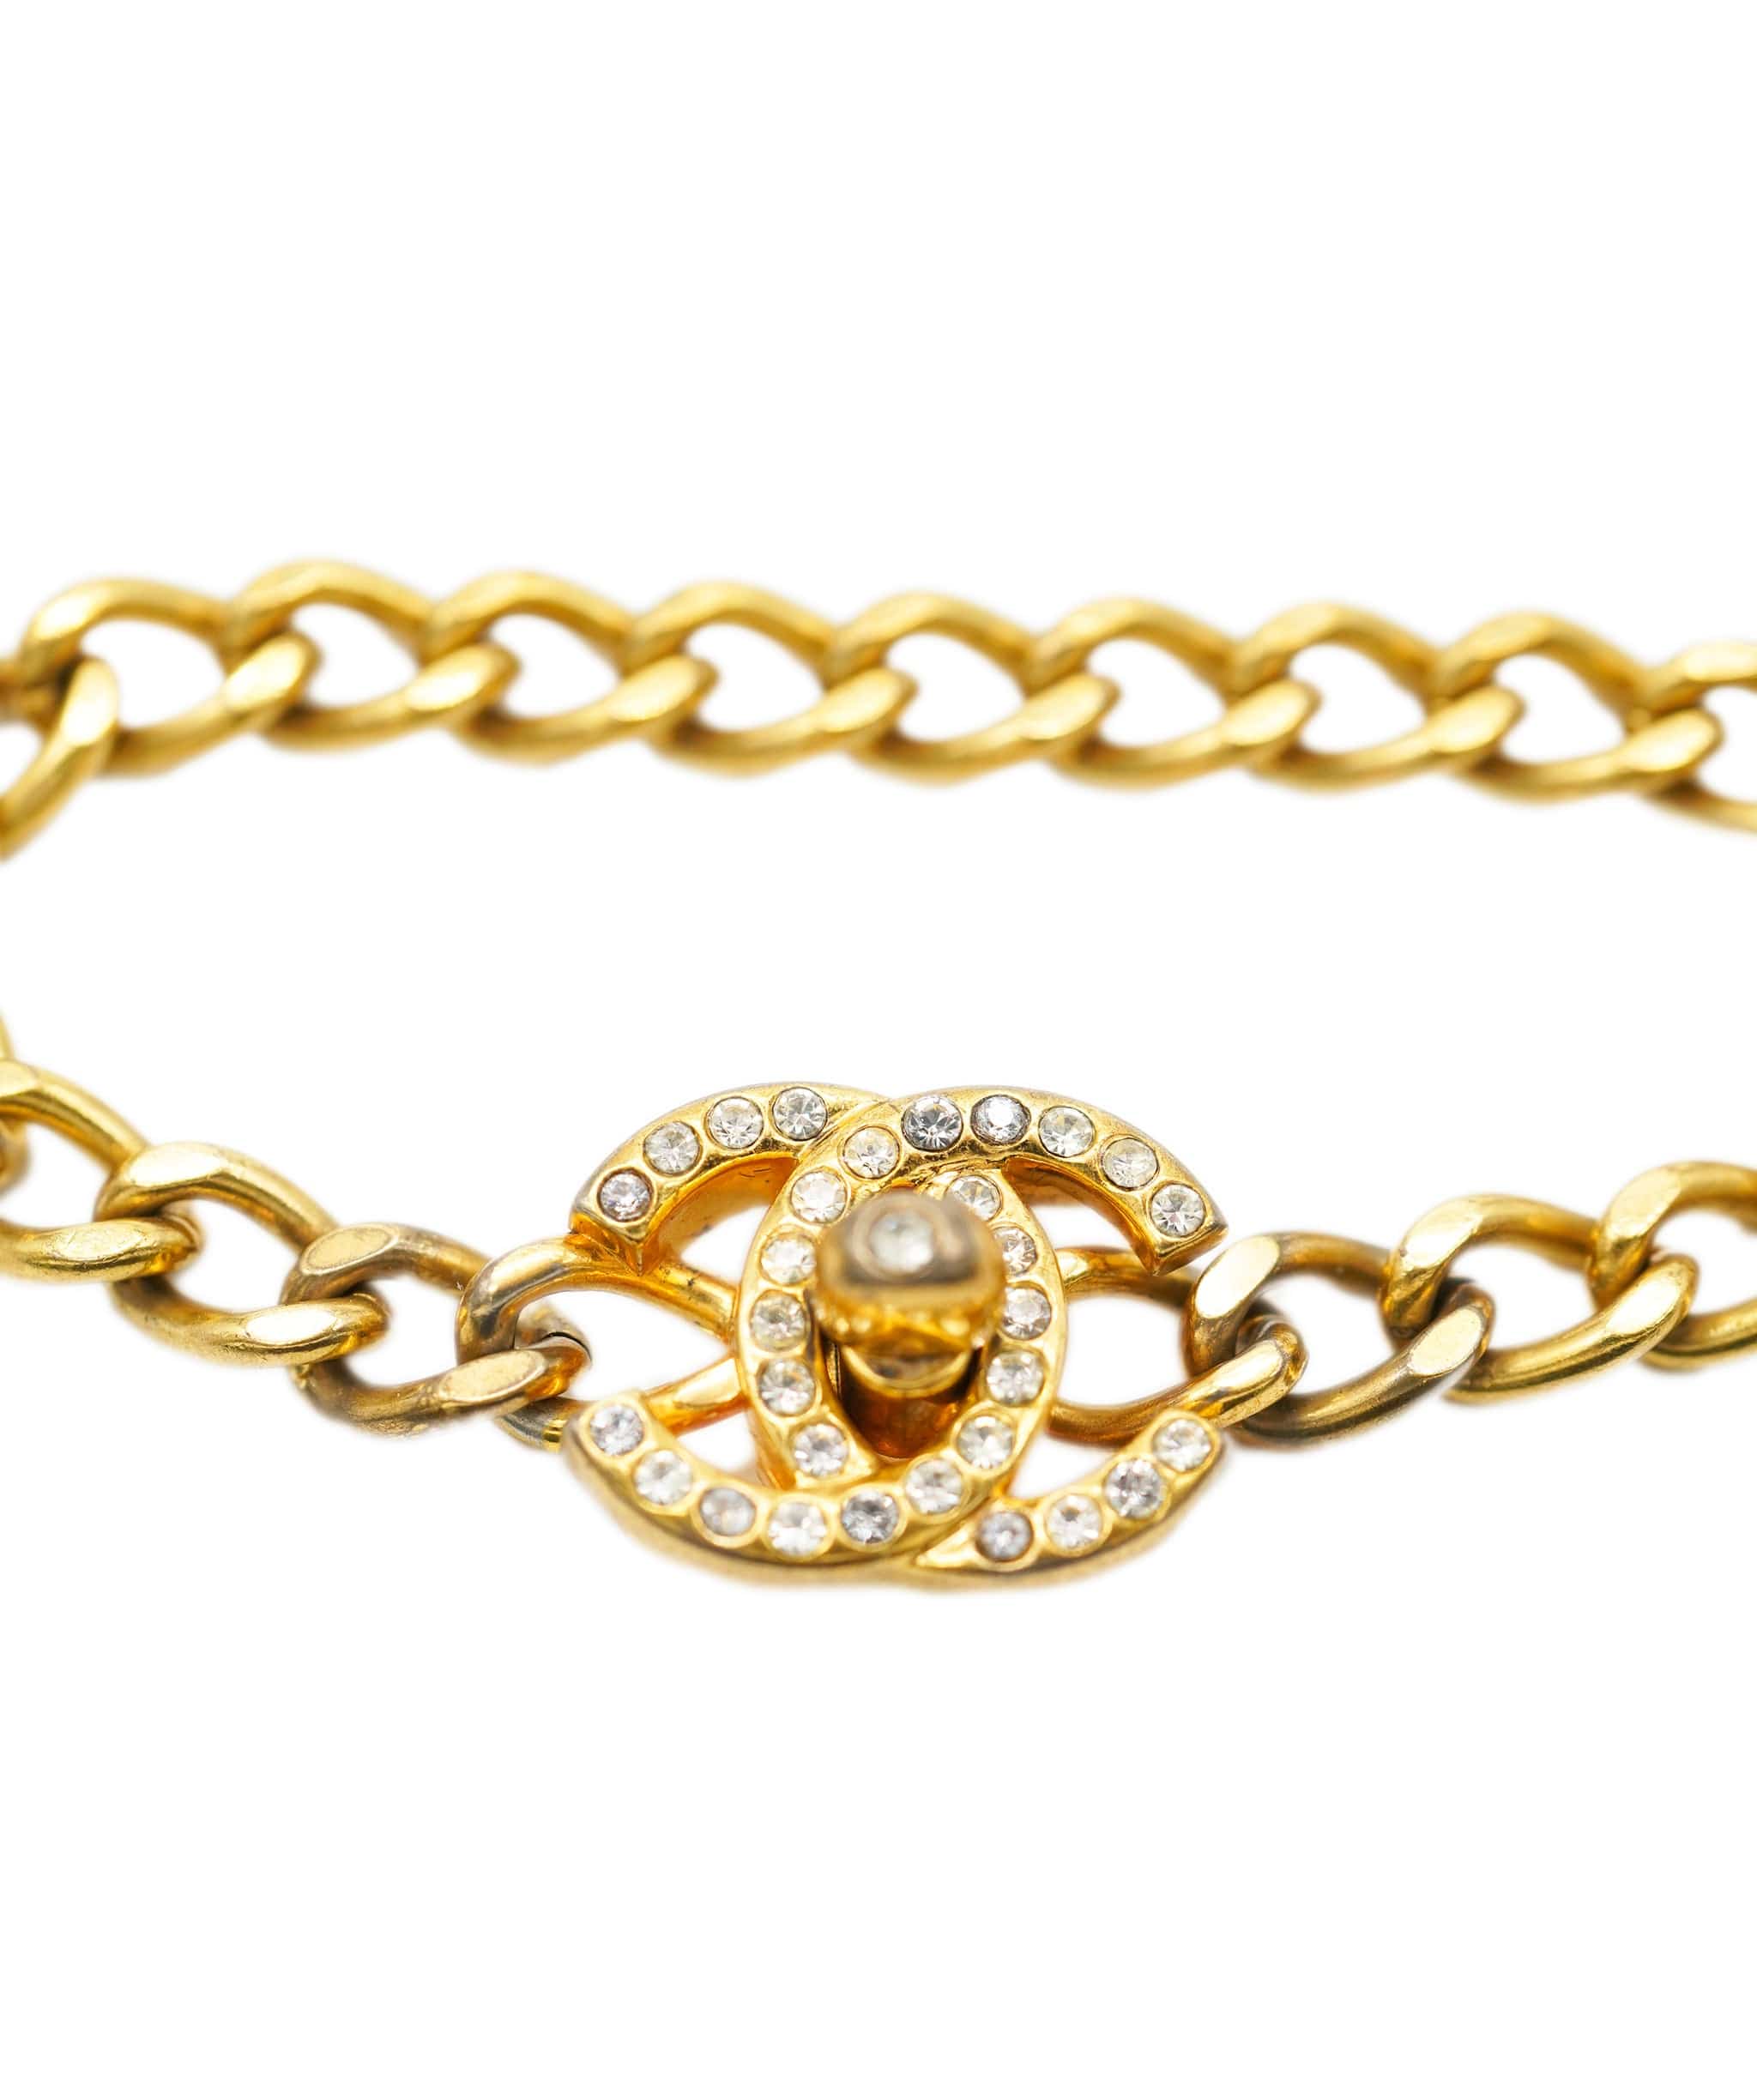 Chanel Vintage Chanel Gold Crystal CC Turnlock Chain Bracelet - AWL2438